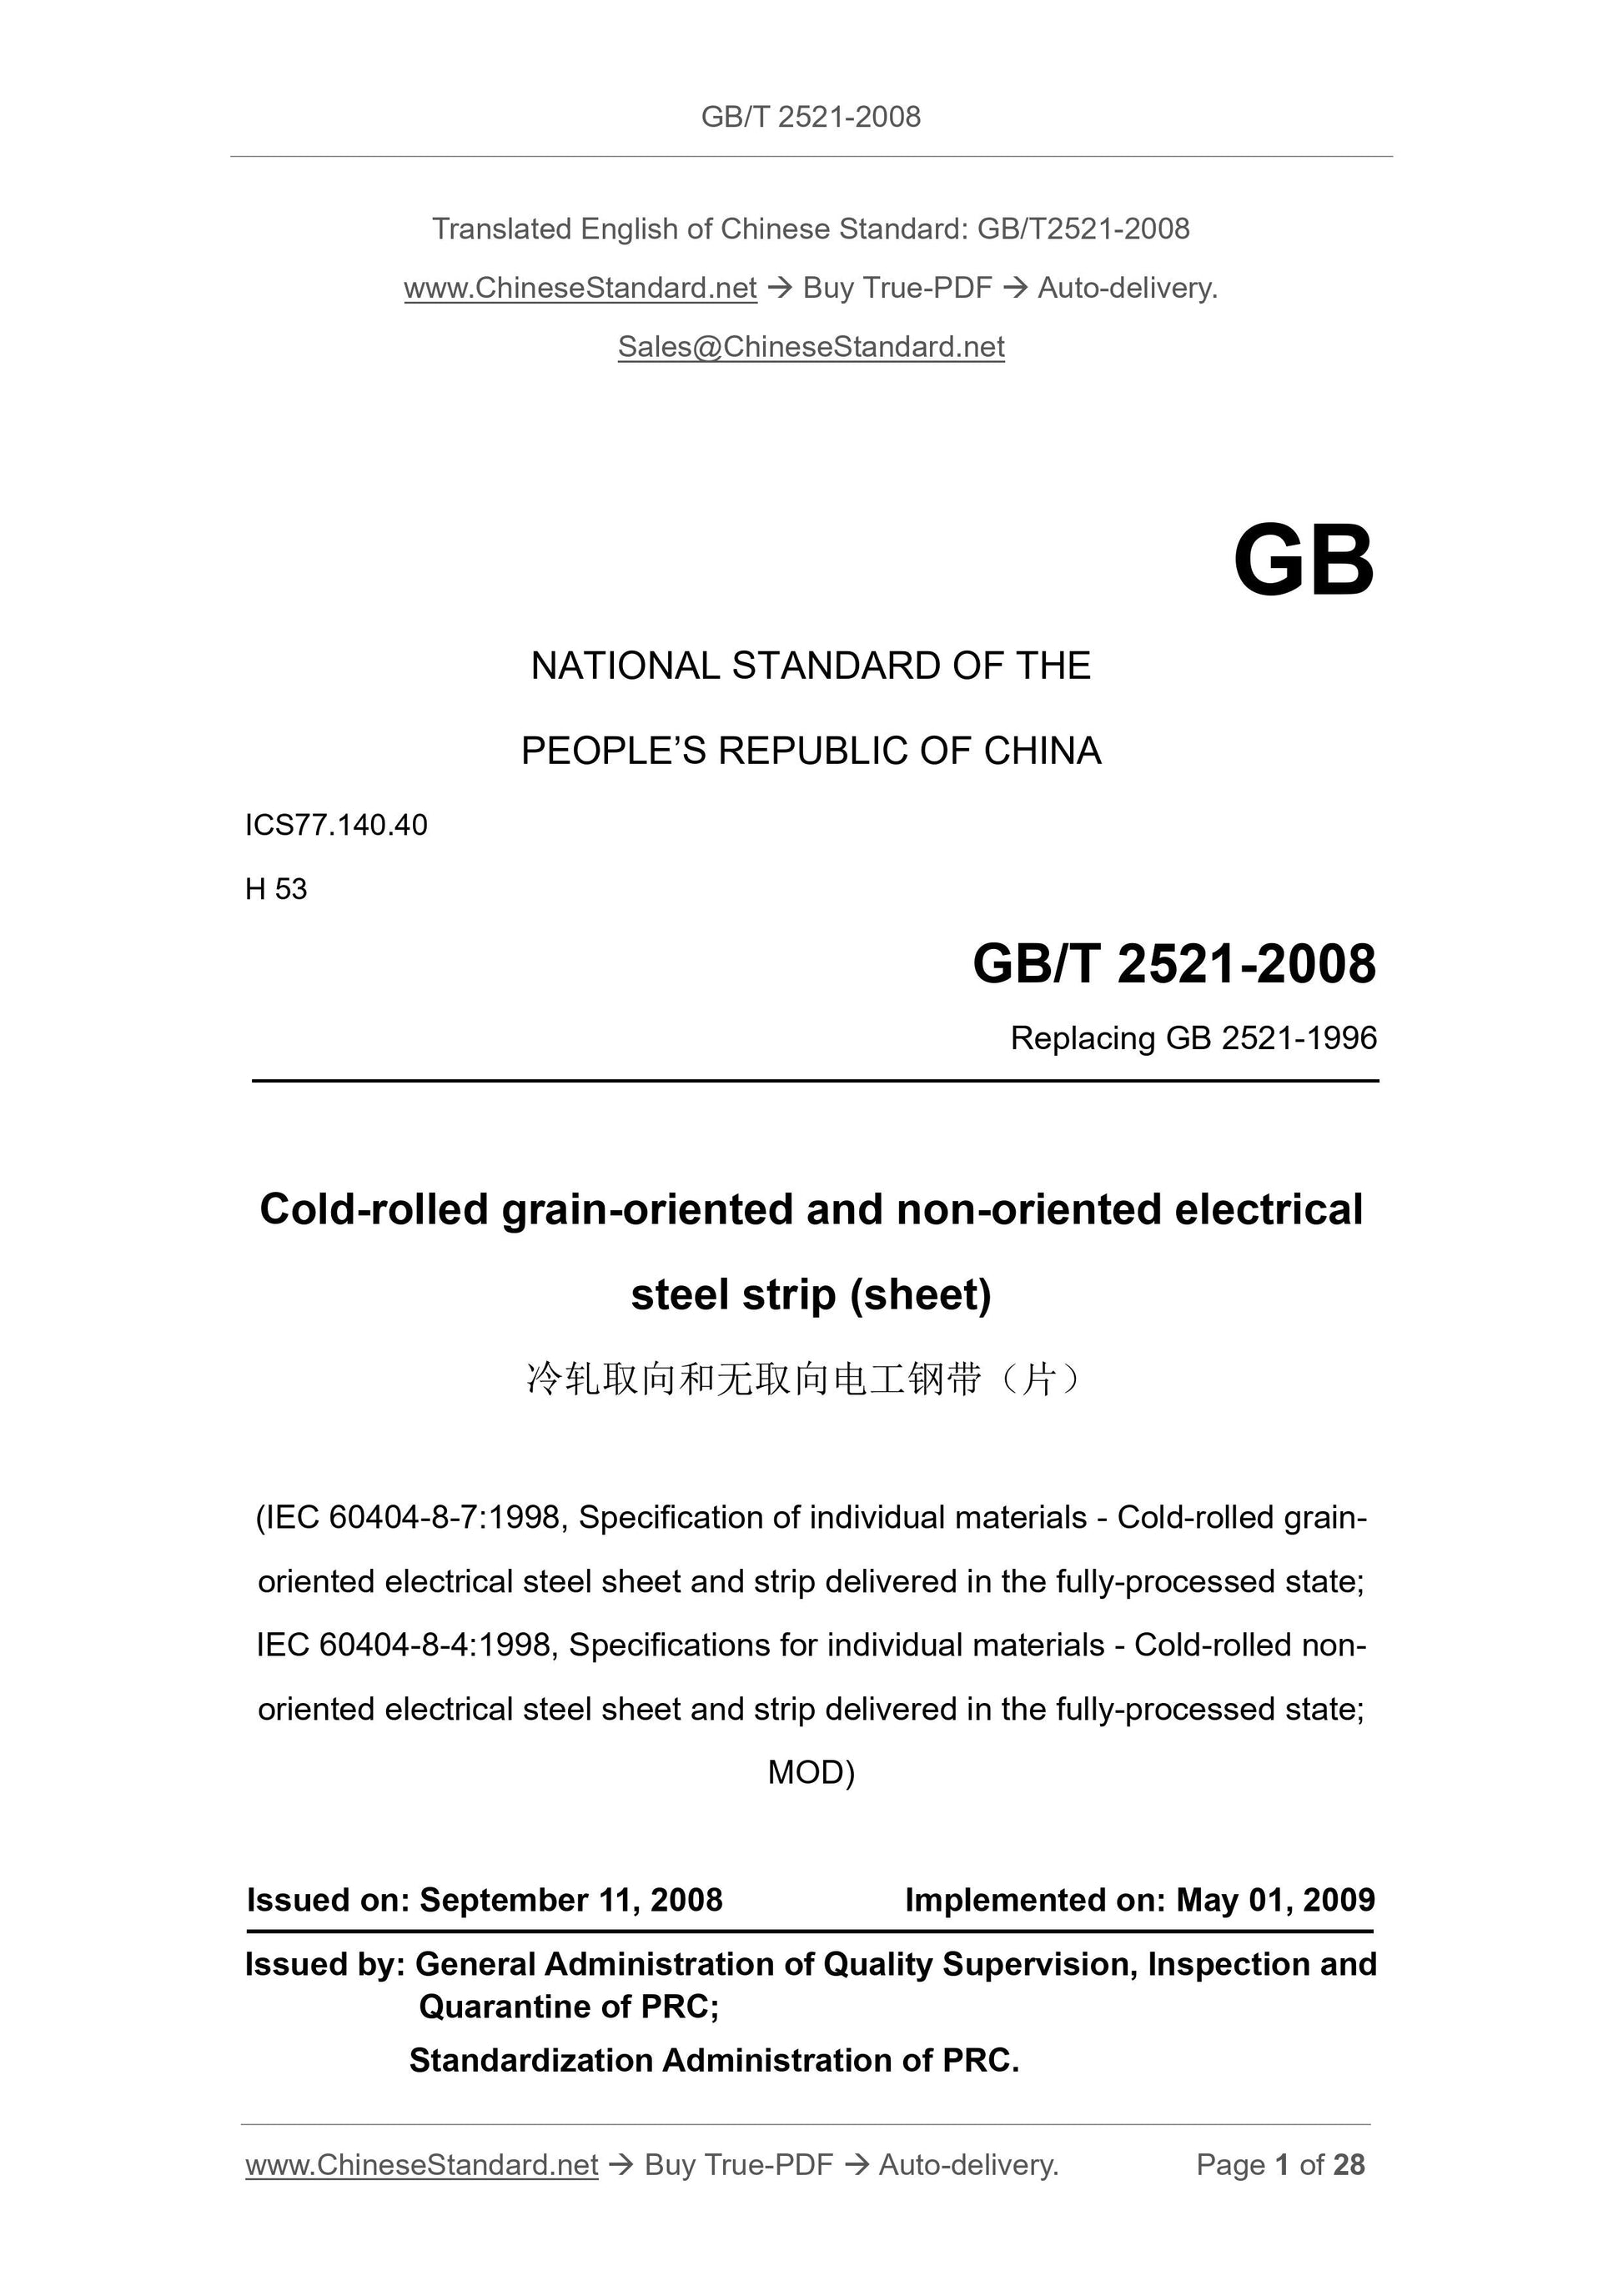 GB/T 2521-2008 Page 1